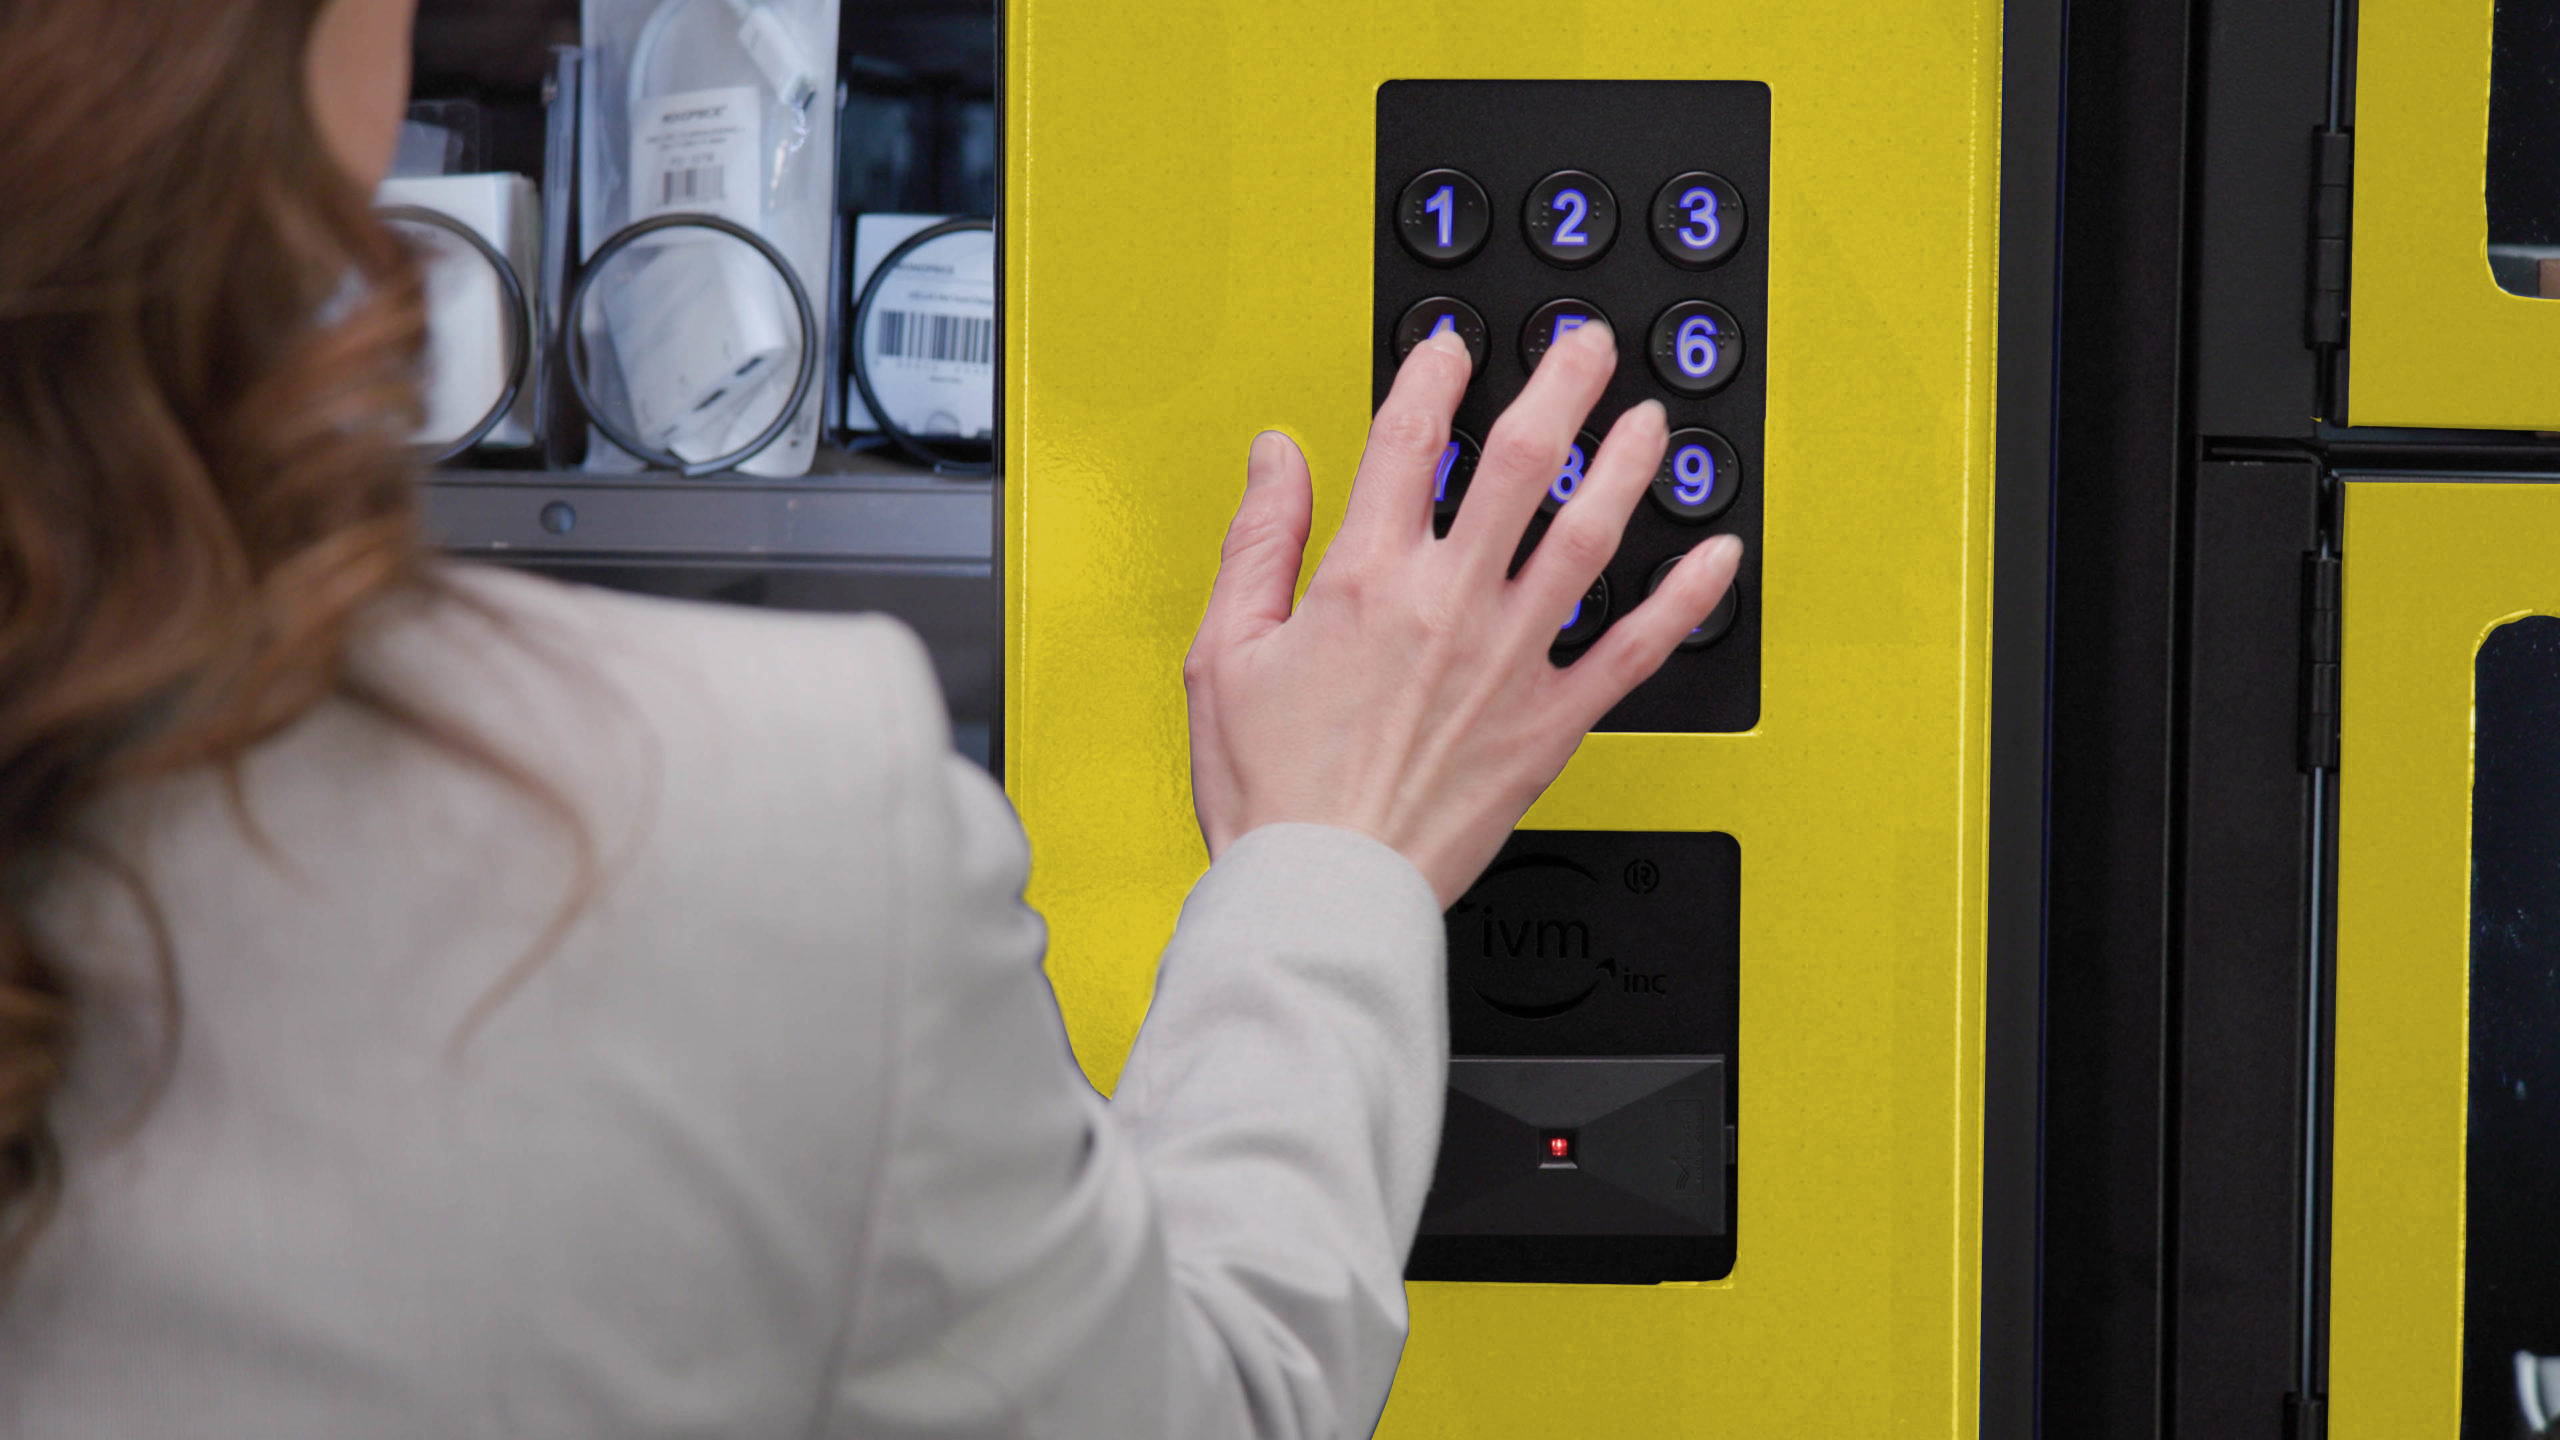 Employee entering their id number into PPE vending machine to access PPE supplies.